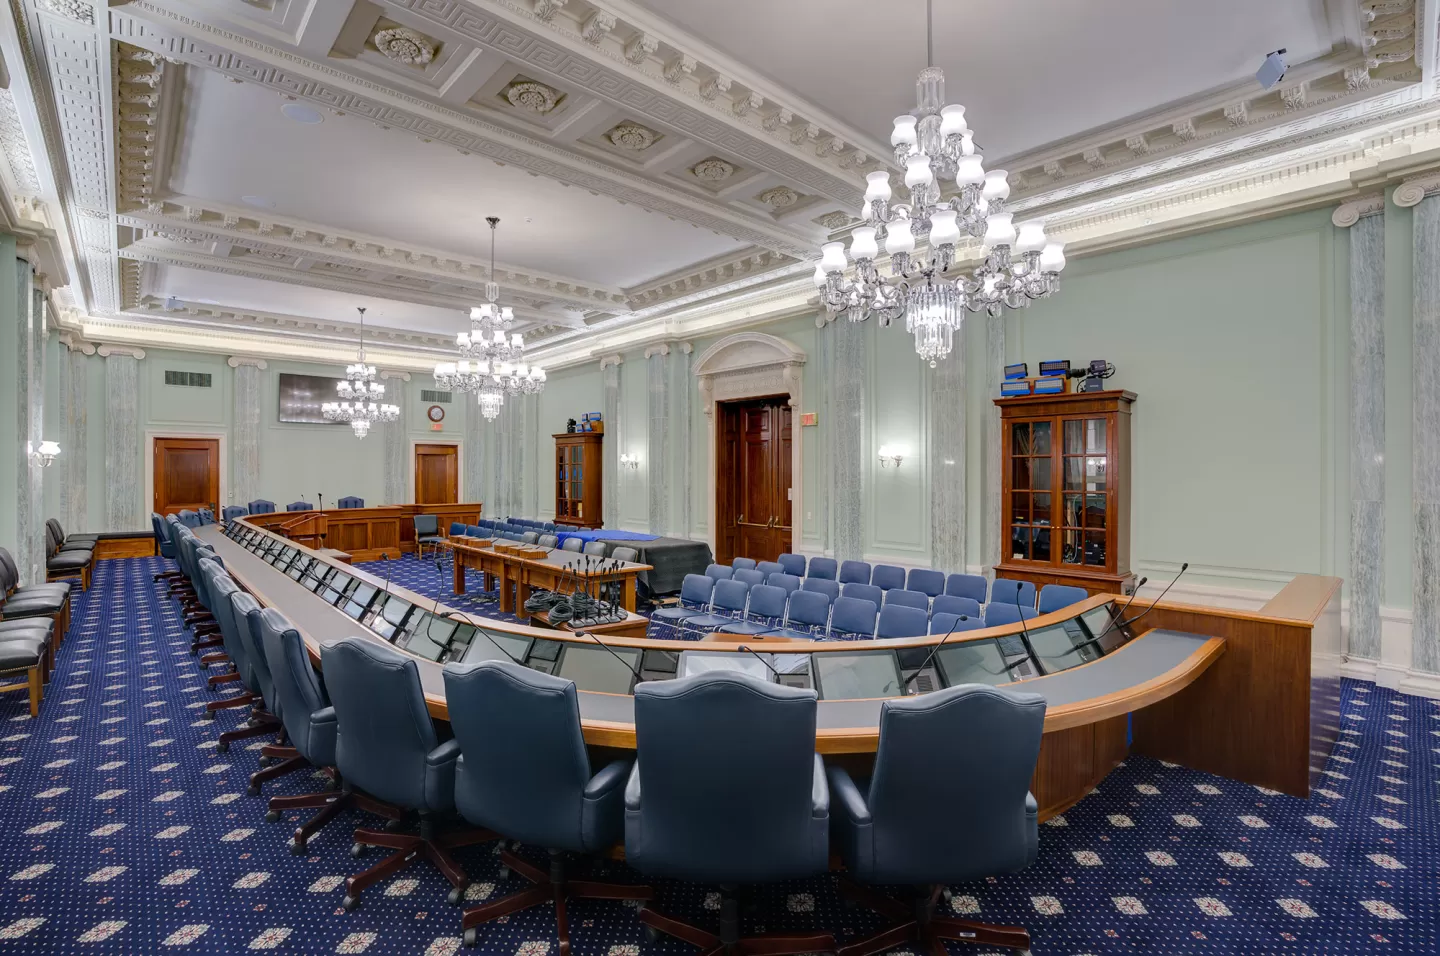 The finished SR-253 hearing room, with the ceiling and plaster reliefs repainted to appear like carved stone, which is truer to the architects' original intention.